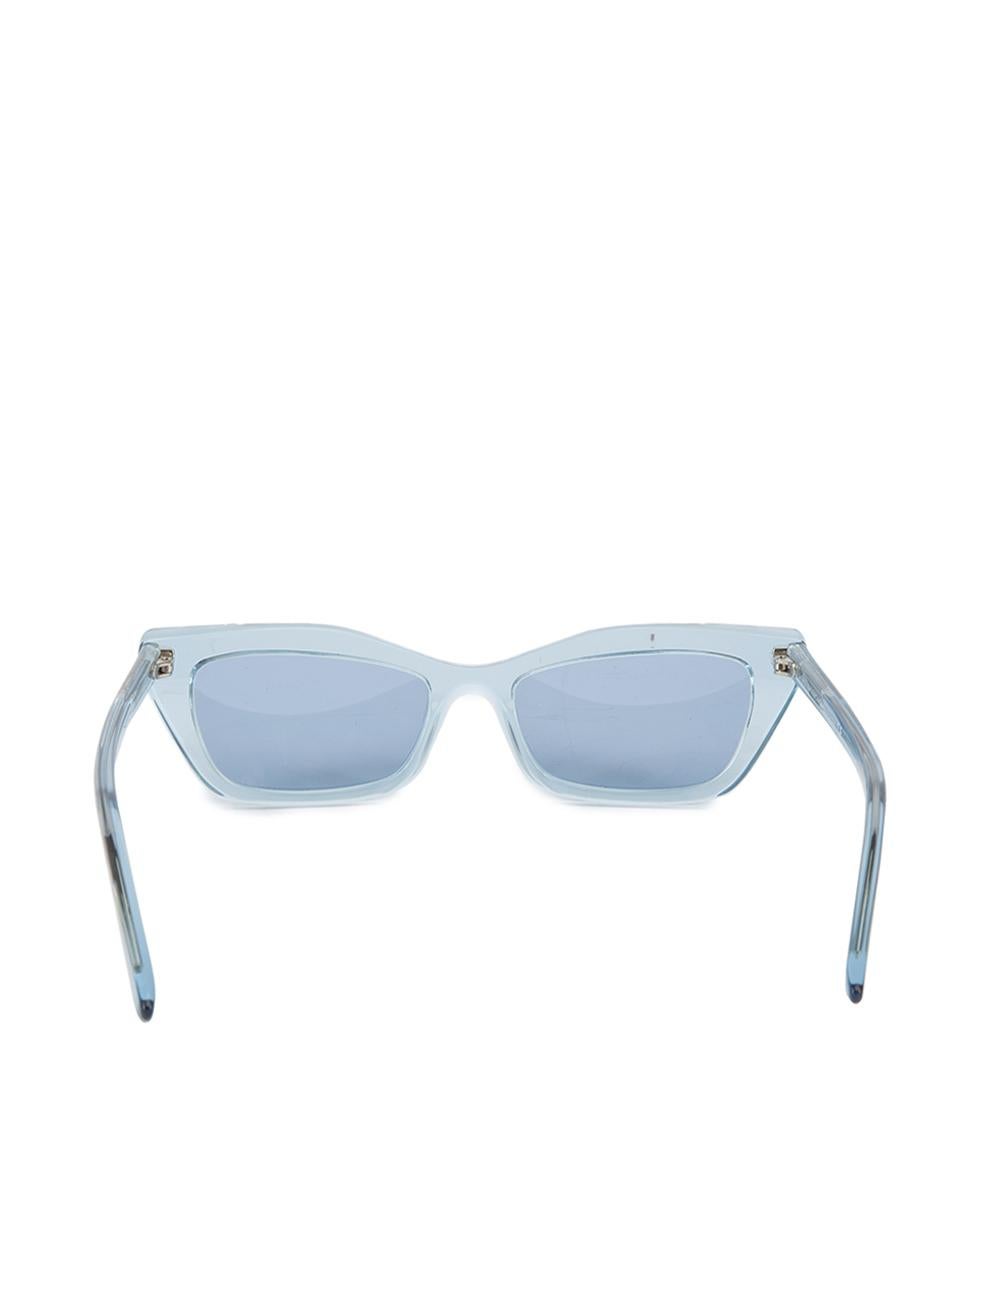 Pre-Loved Balenciaga Women's Blue Rectangular Framed Sunglasses In Excellent Condition In London, GB